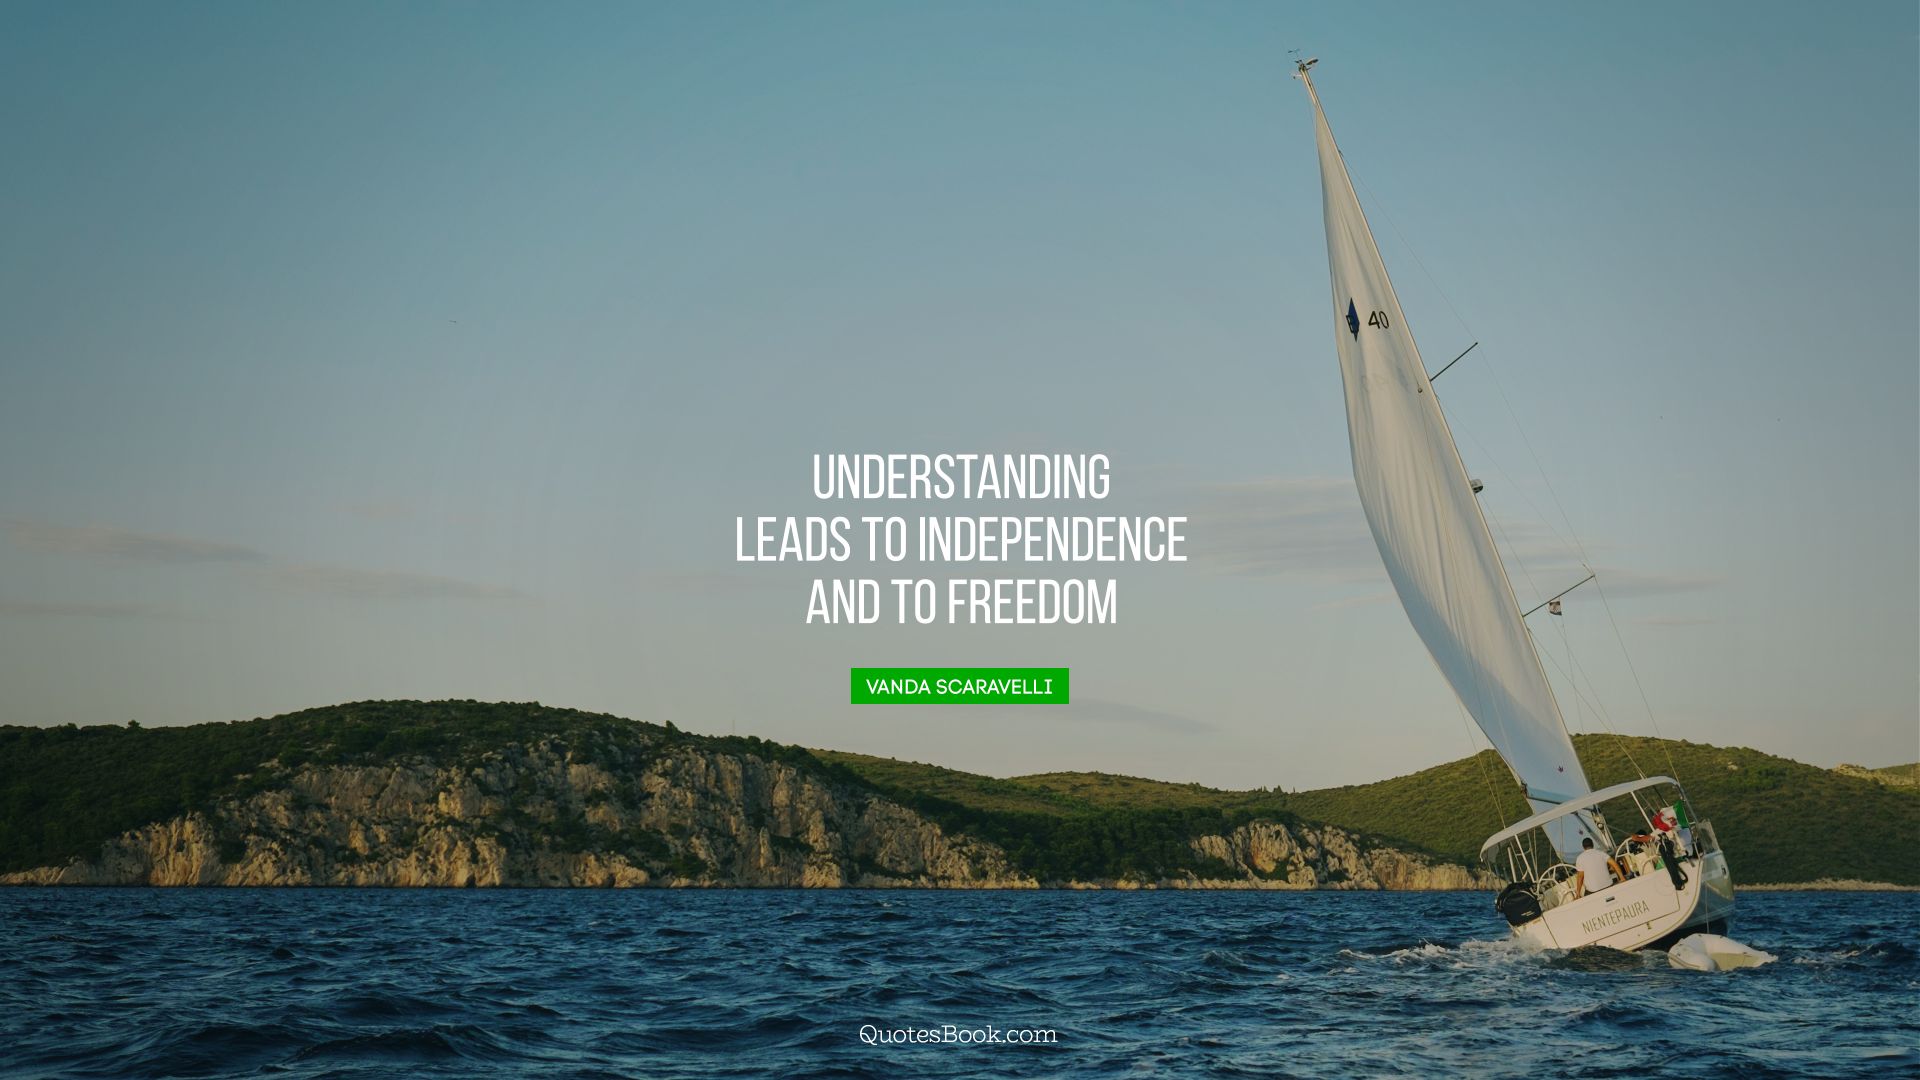 Understanding leads to independence and to freedom. - Quote by Vanda Scaravelli